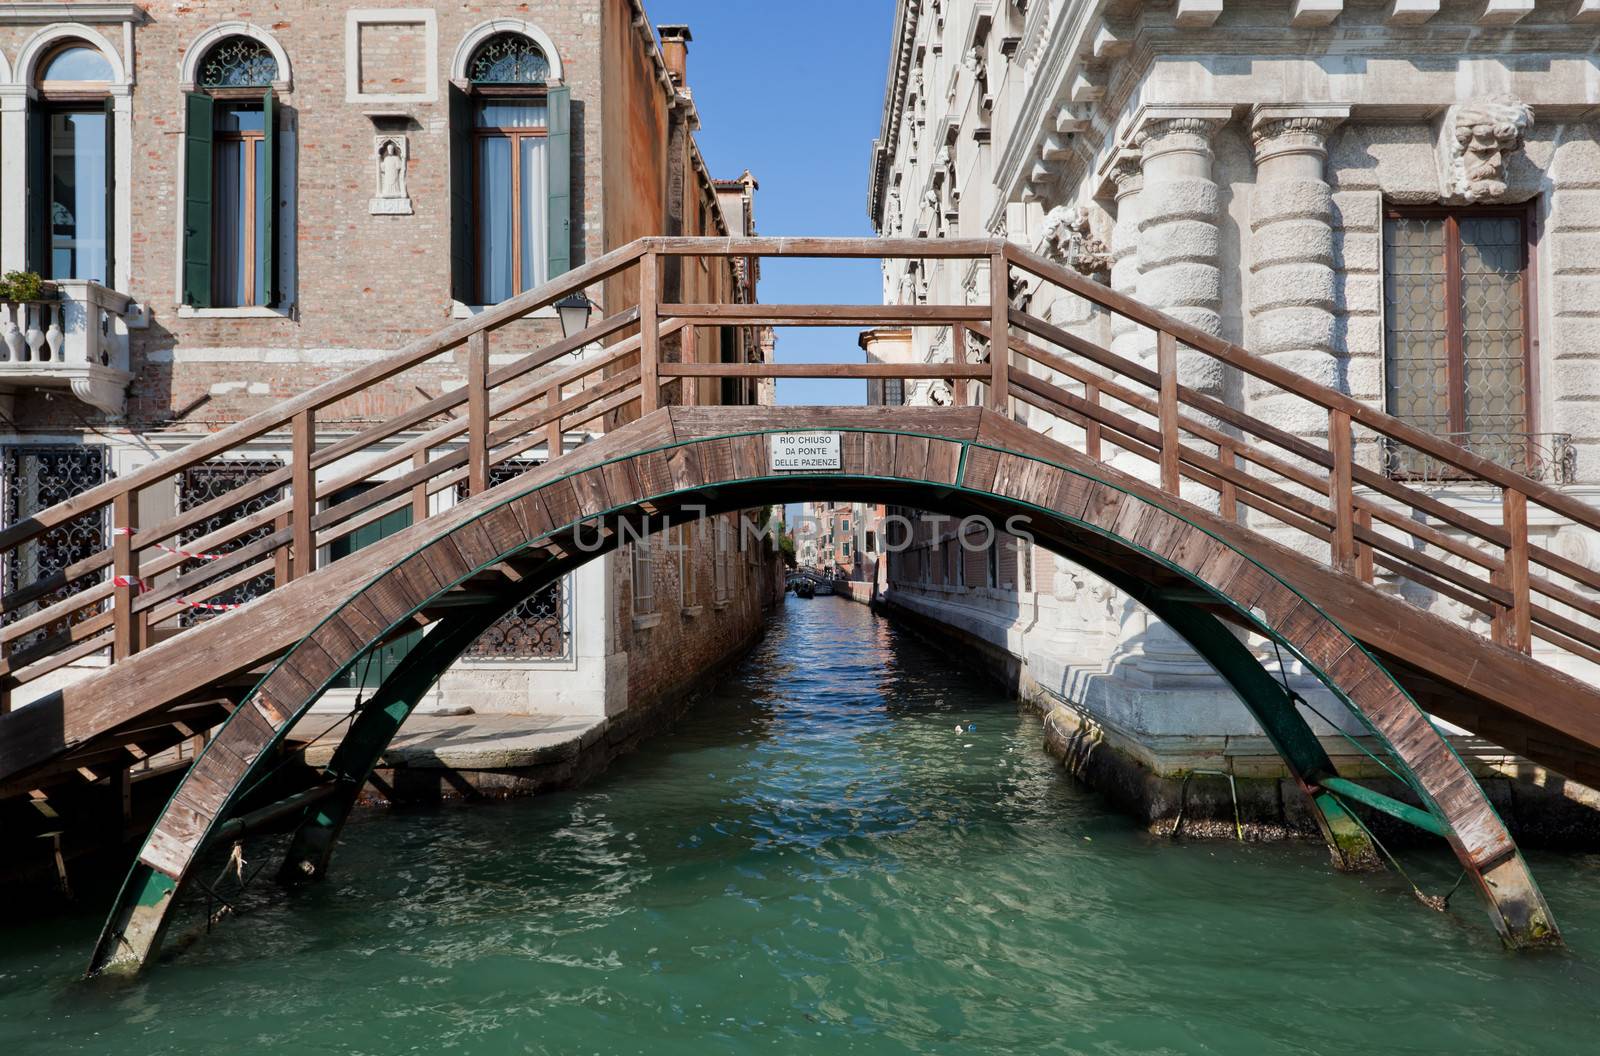 Venice, Italy. A bridge over a narrow canal among old Venetian architecture